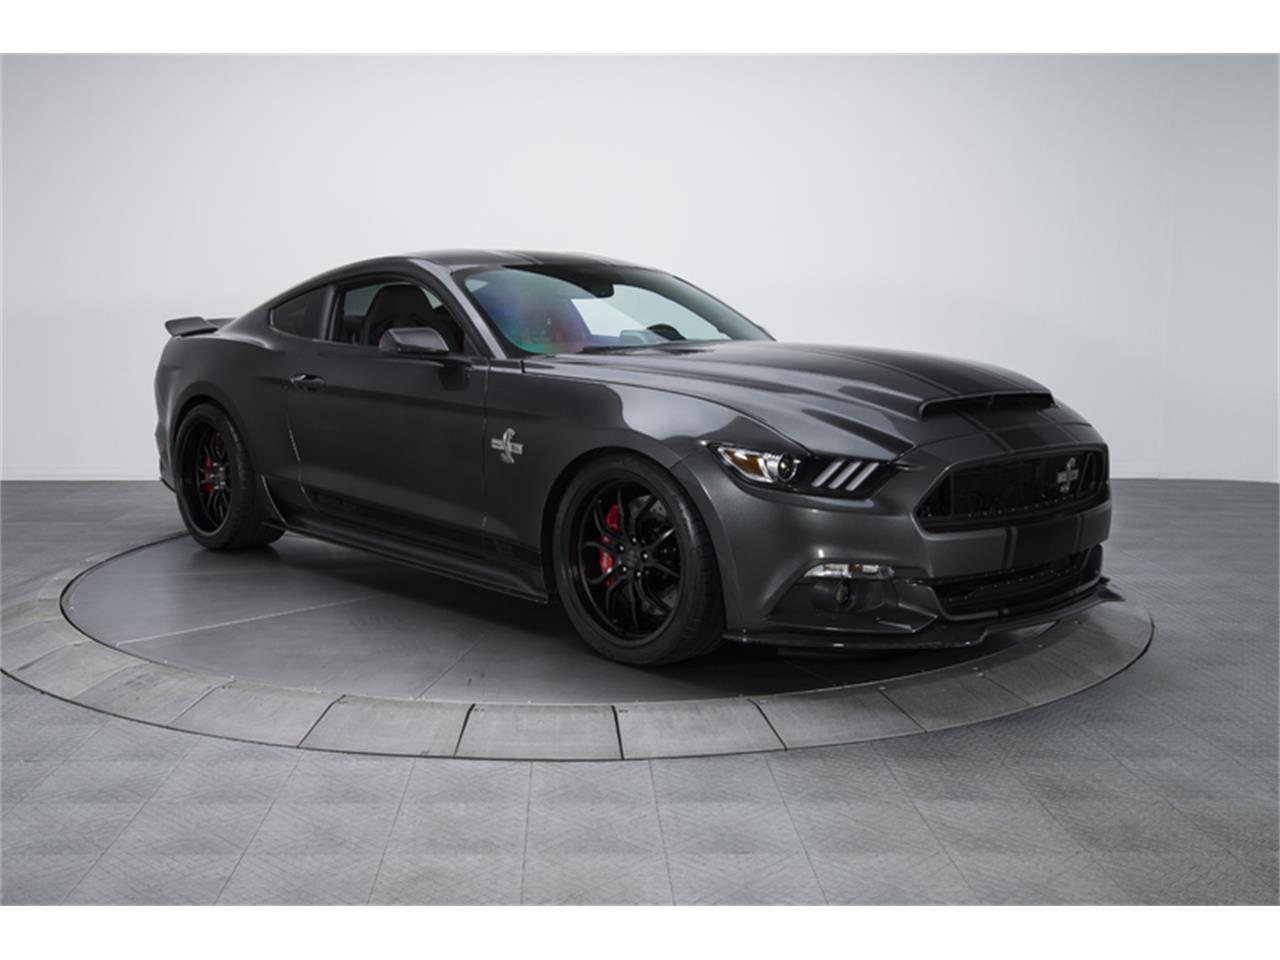 2016 Ford Mustang Super Snake for Sale | ClassicCars.com ...